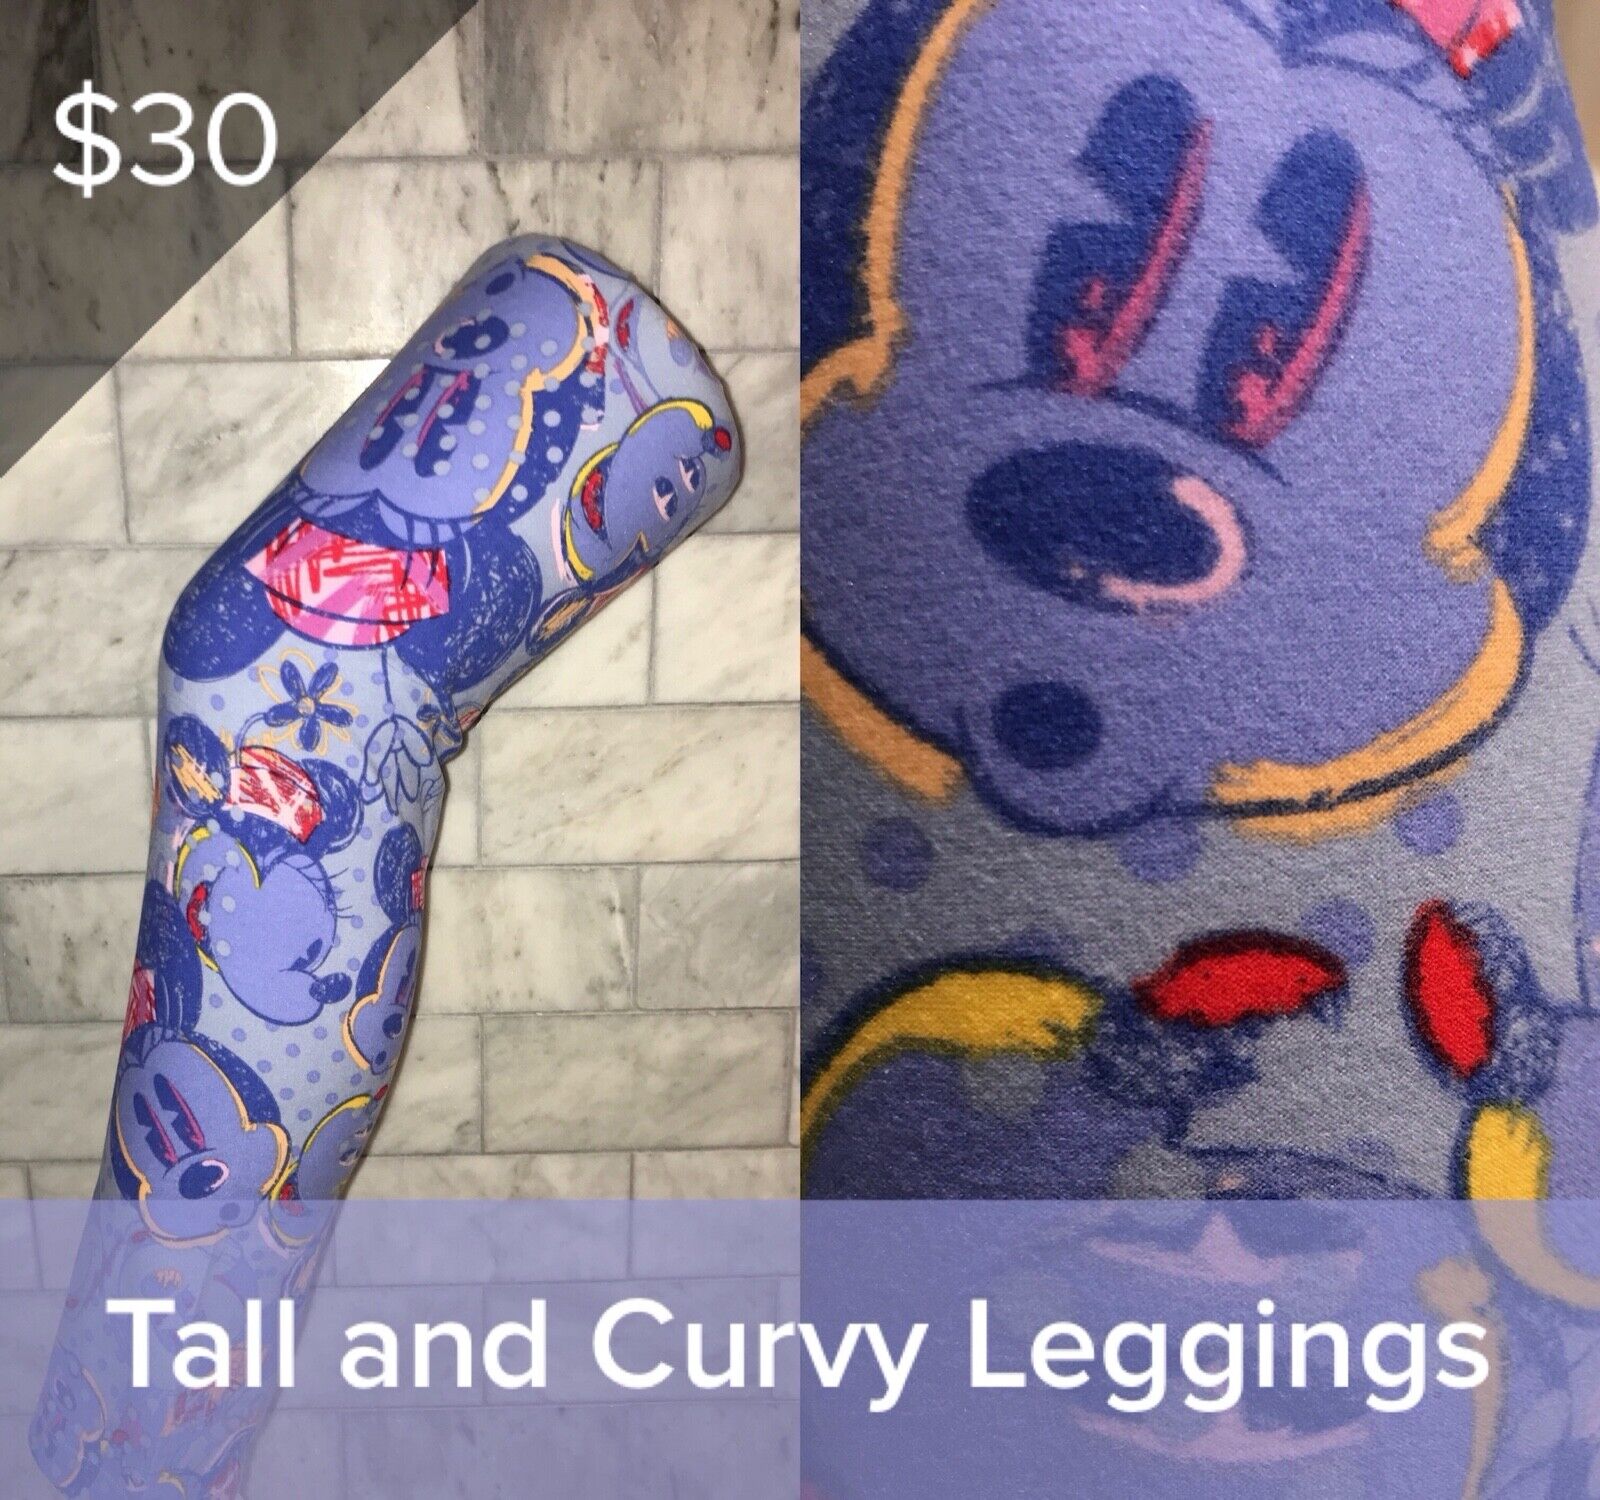 LuLaRoe Tall and Curvy T&C leggings brand new BN Vintage 2017 DISNEY collection